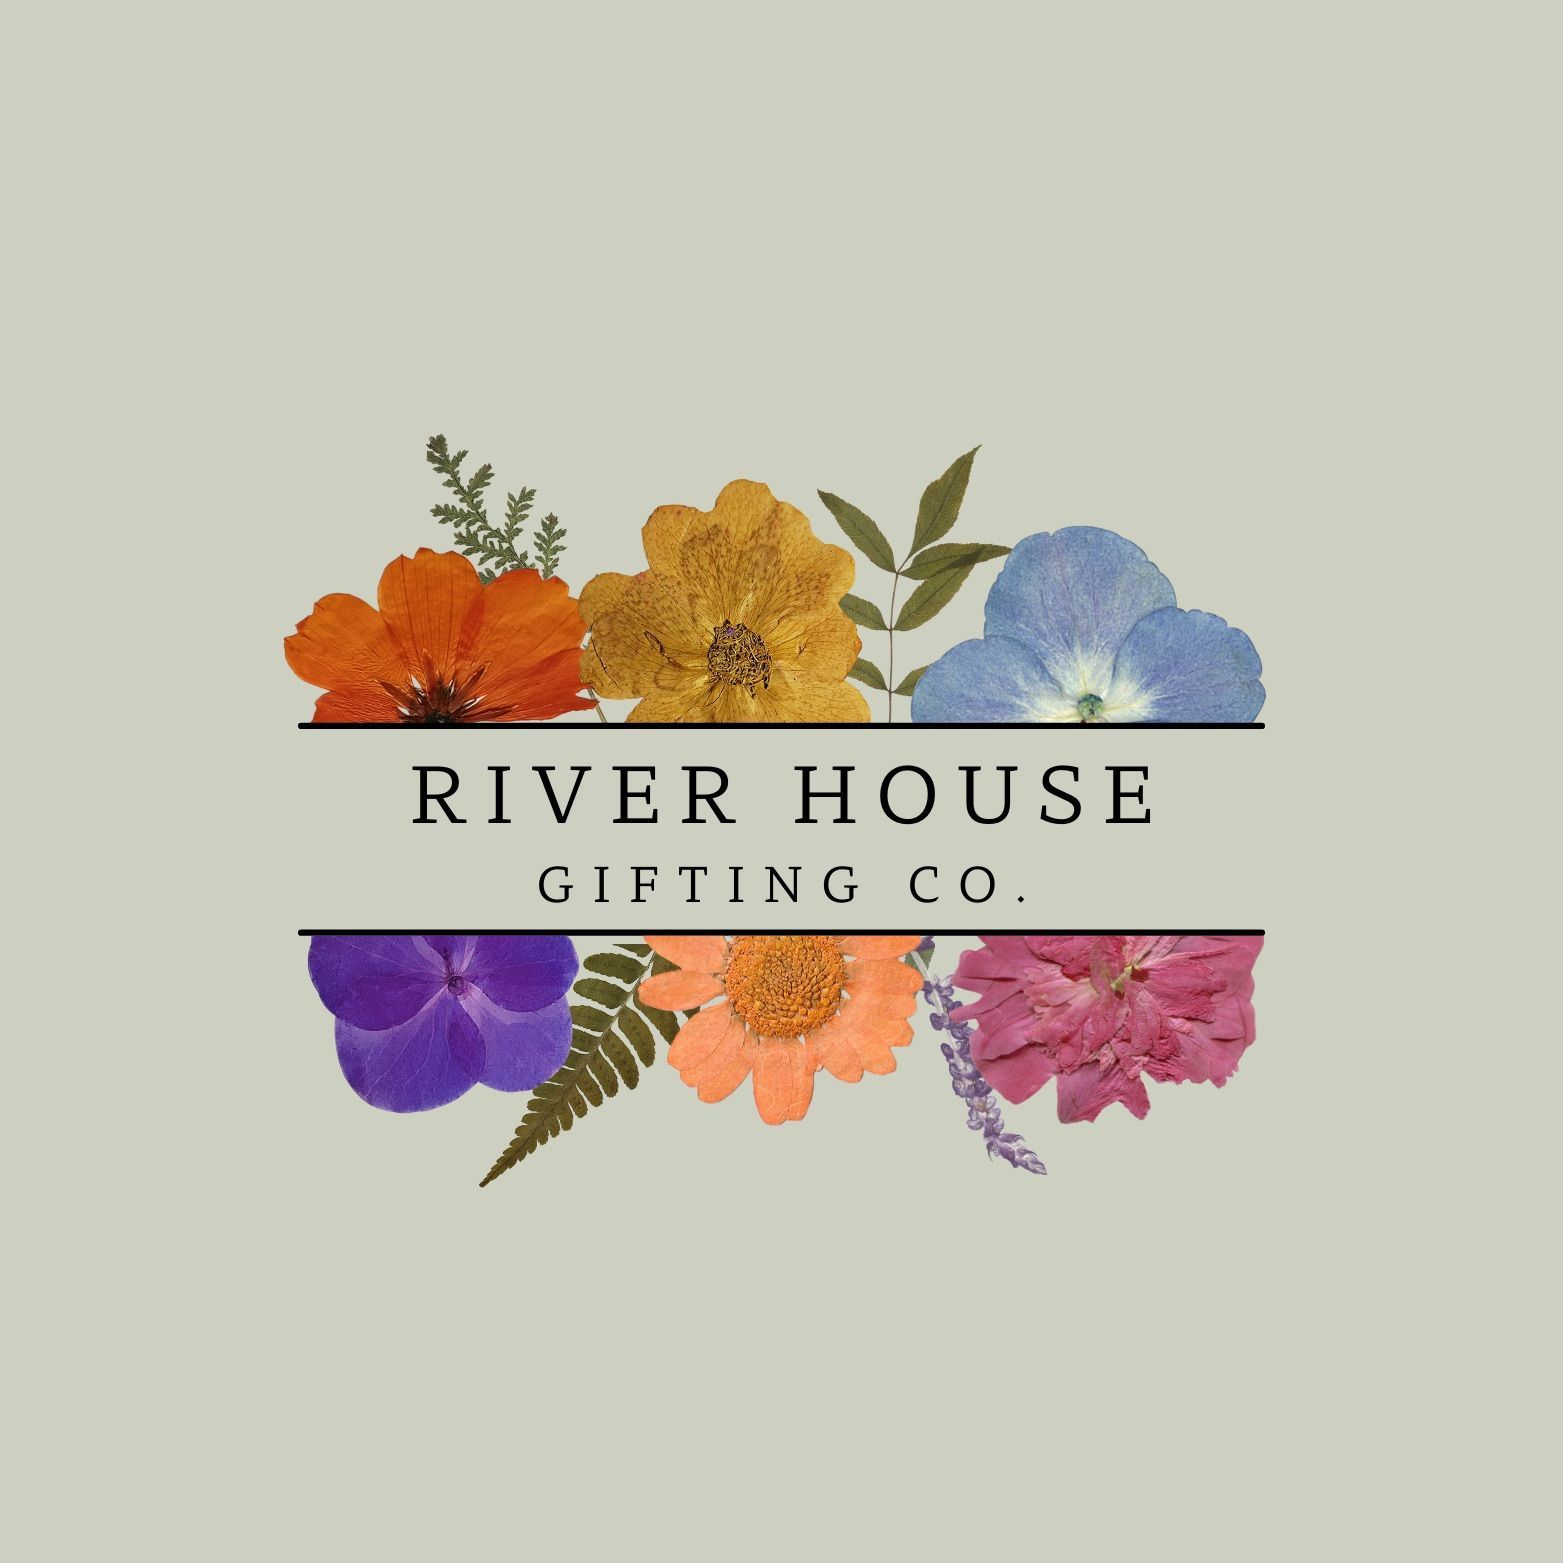 River House Gifting Co.